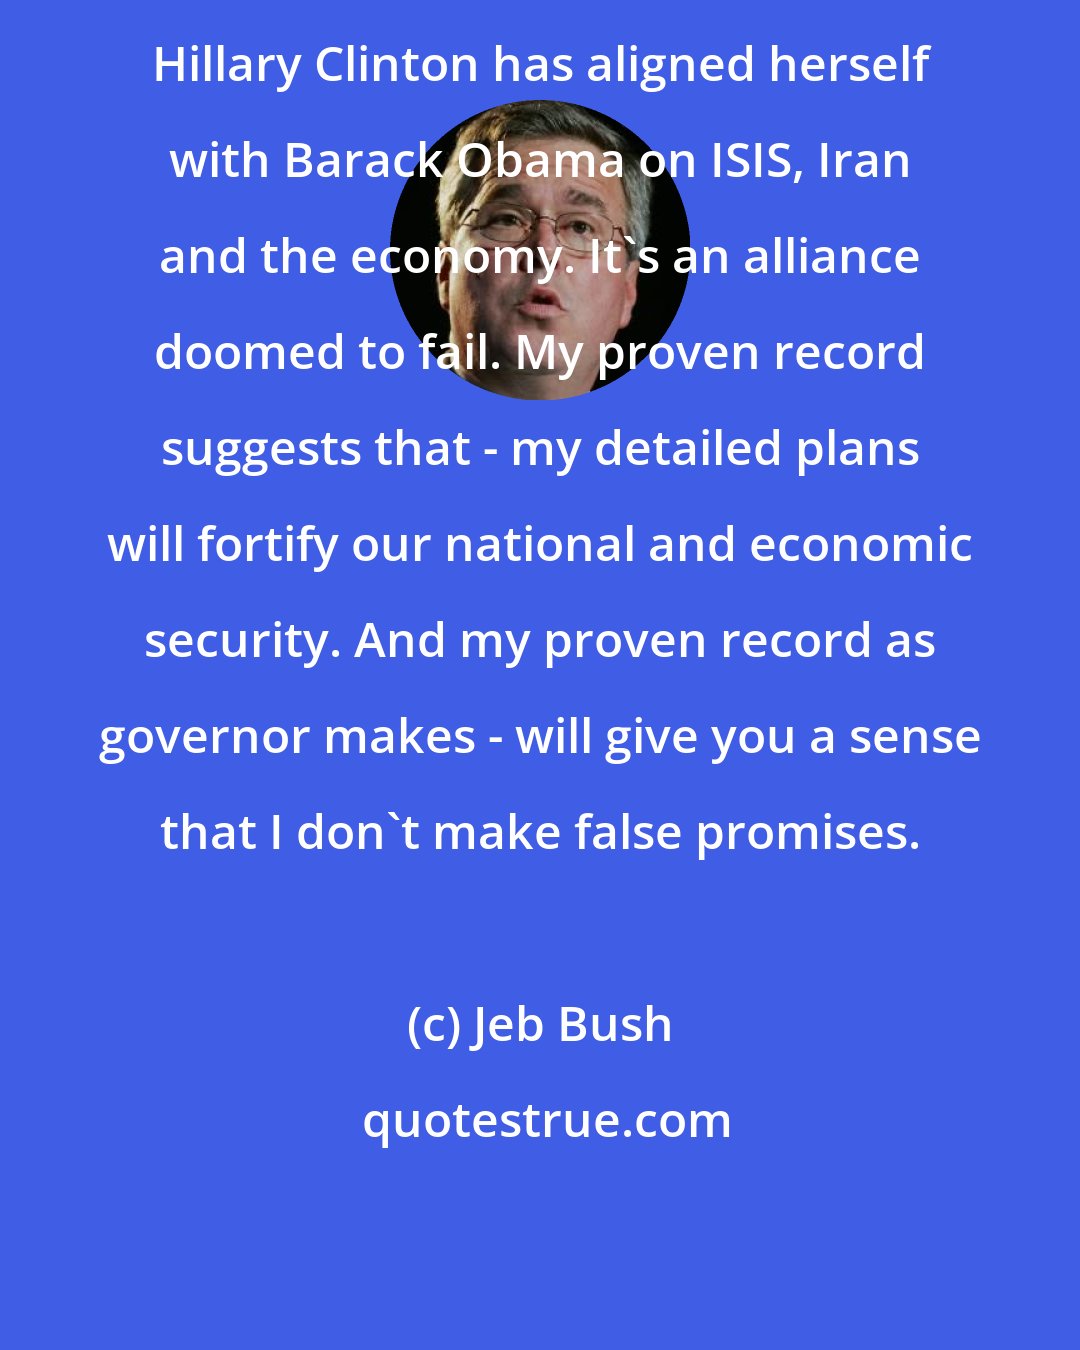 Jeb Bush: Hillary Clinton has aligned herself with Barack Obama on ISIS, Iran and the economy. It's an alliance doomed to fail. My proven record suggests that - my detailed plans will fortify our national and economic security. And my proven record as governor makes - will give you a sense that I don't make false promises.